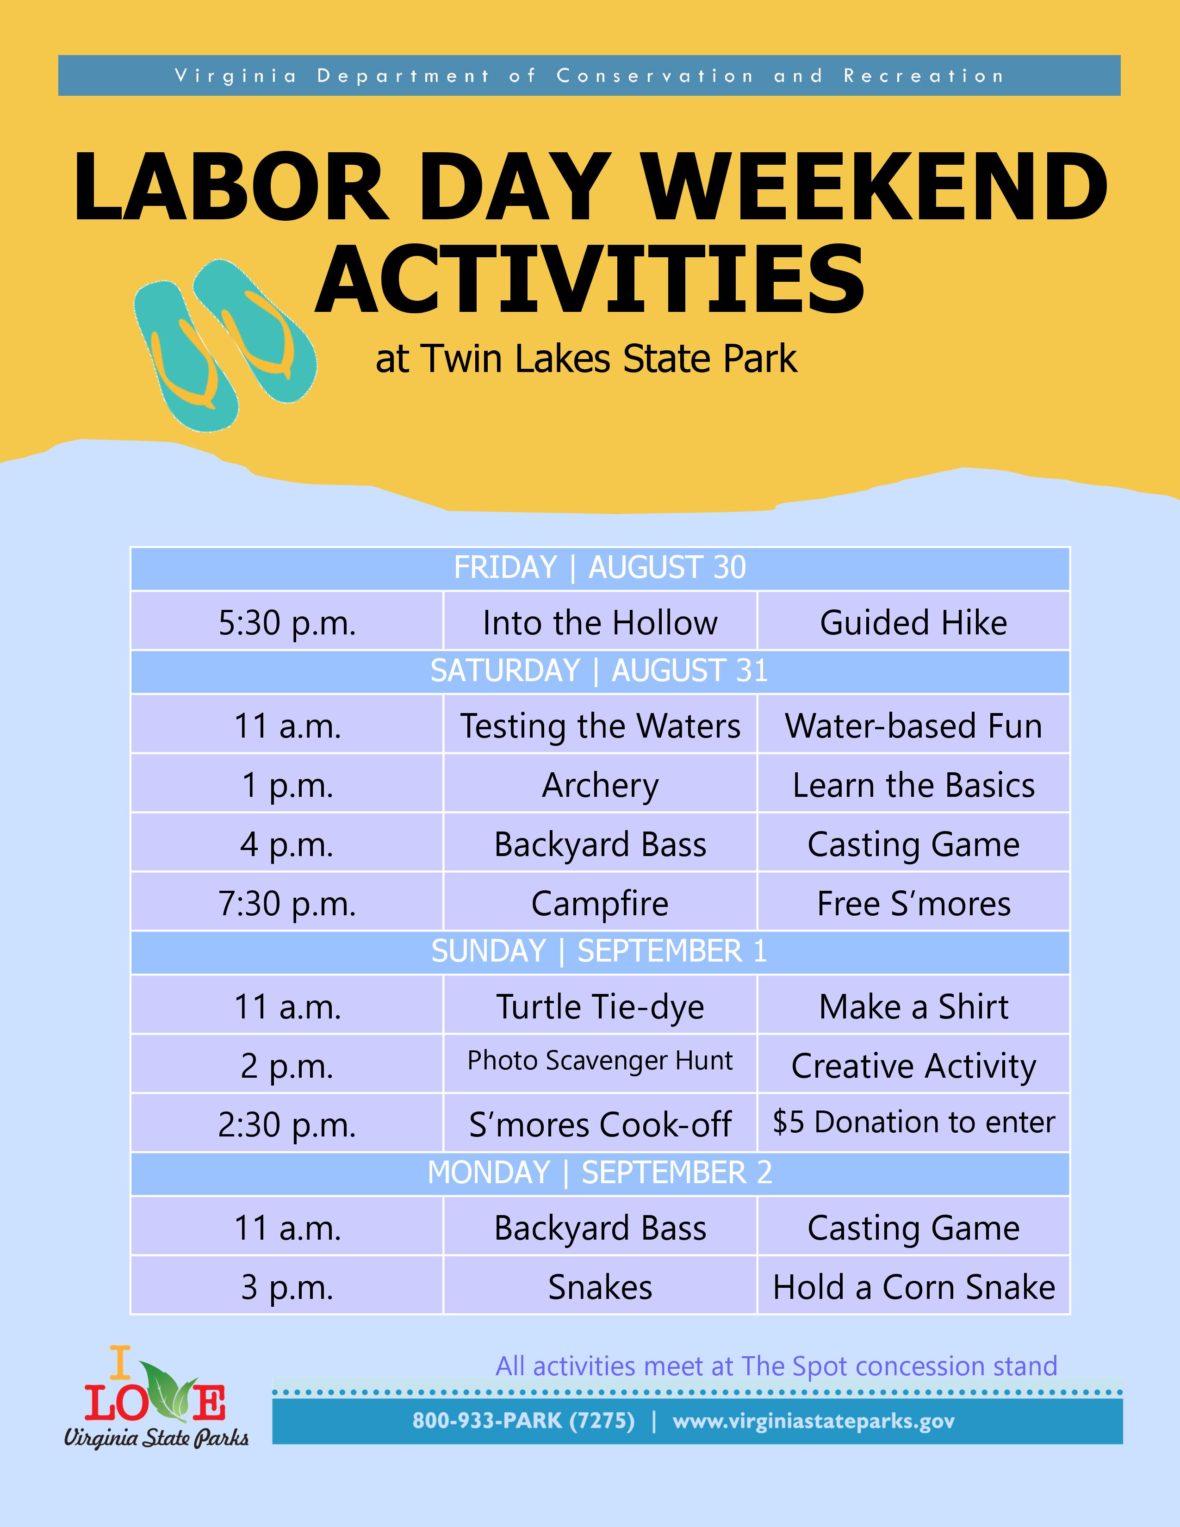 Labor Day Weekend at Twin Lakes State Park Visit Farmville